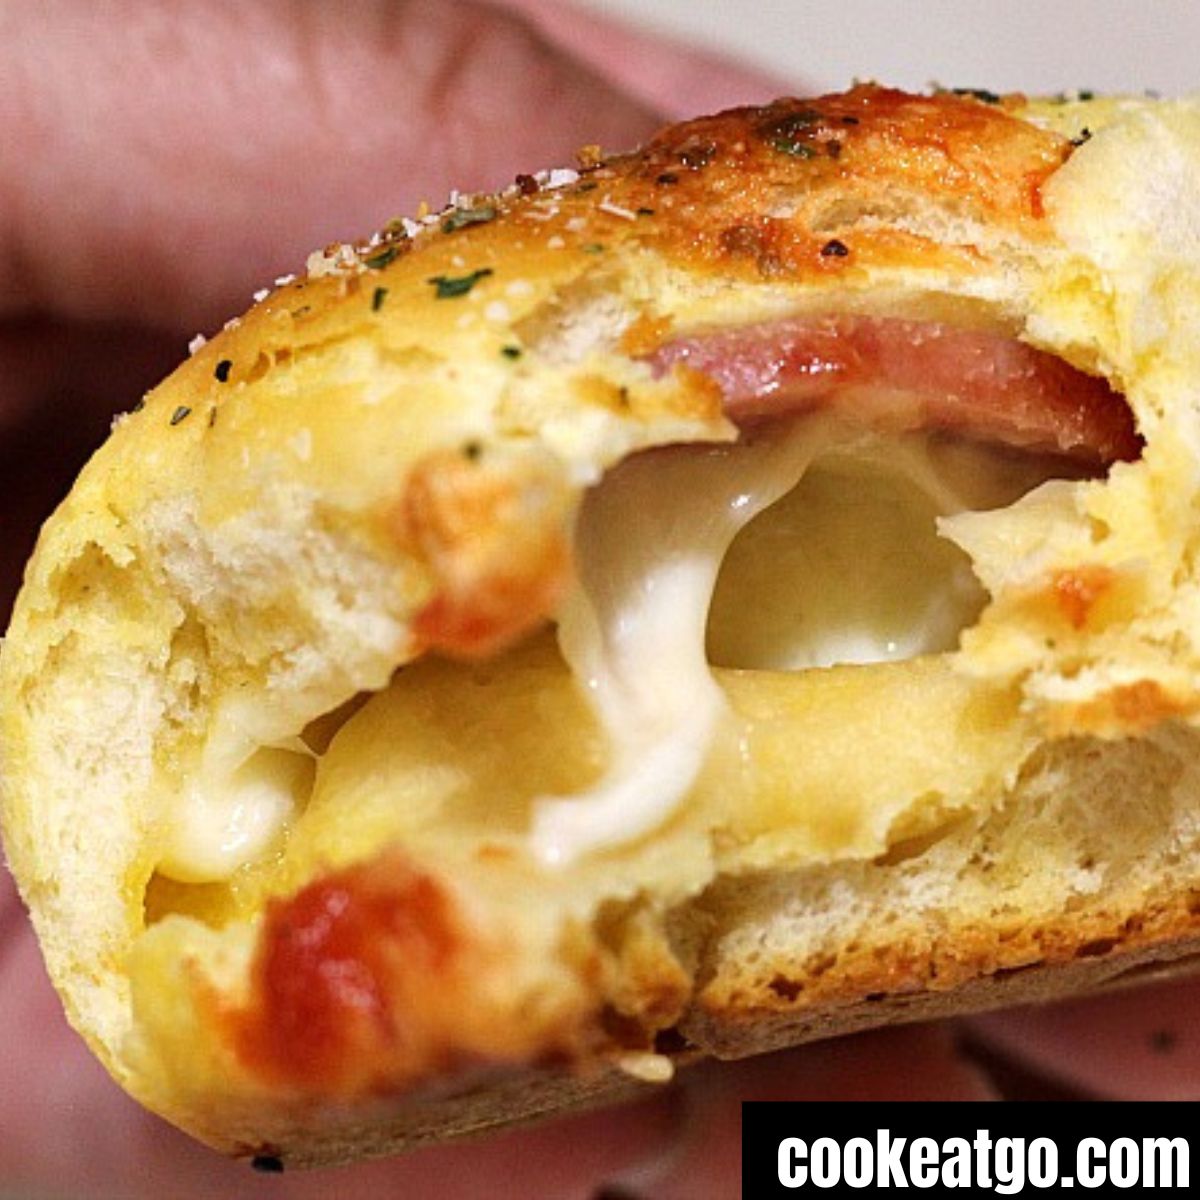 Inside of a Cheesy Pizza Biscuit made from pillsbury biscuit dough